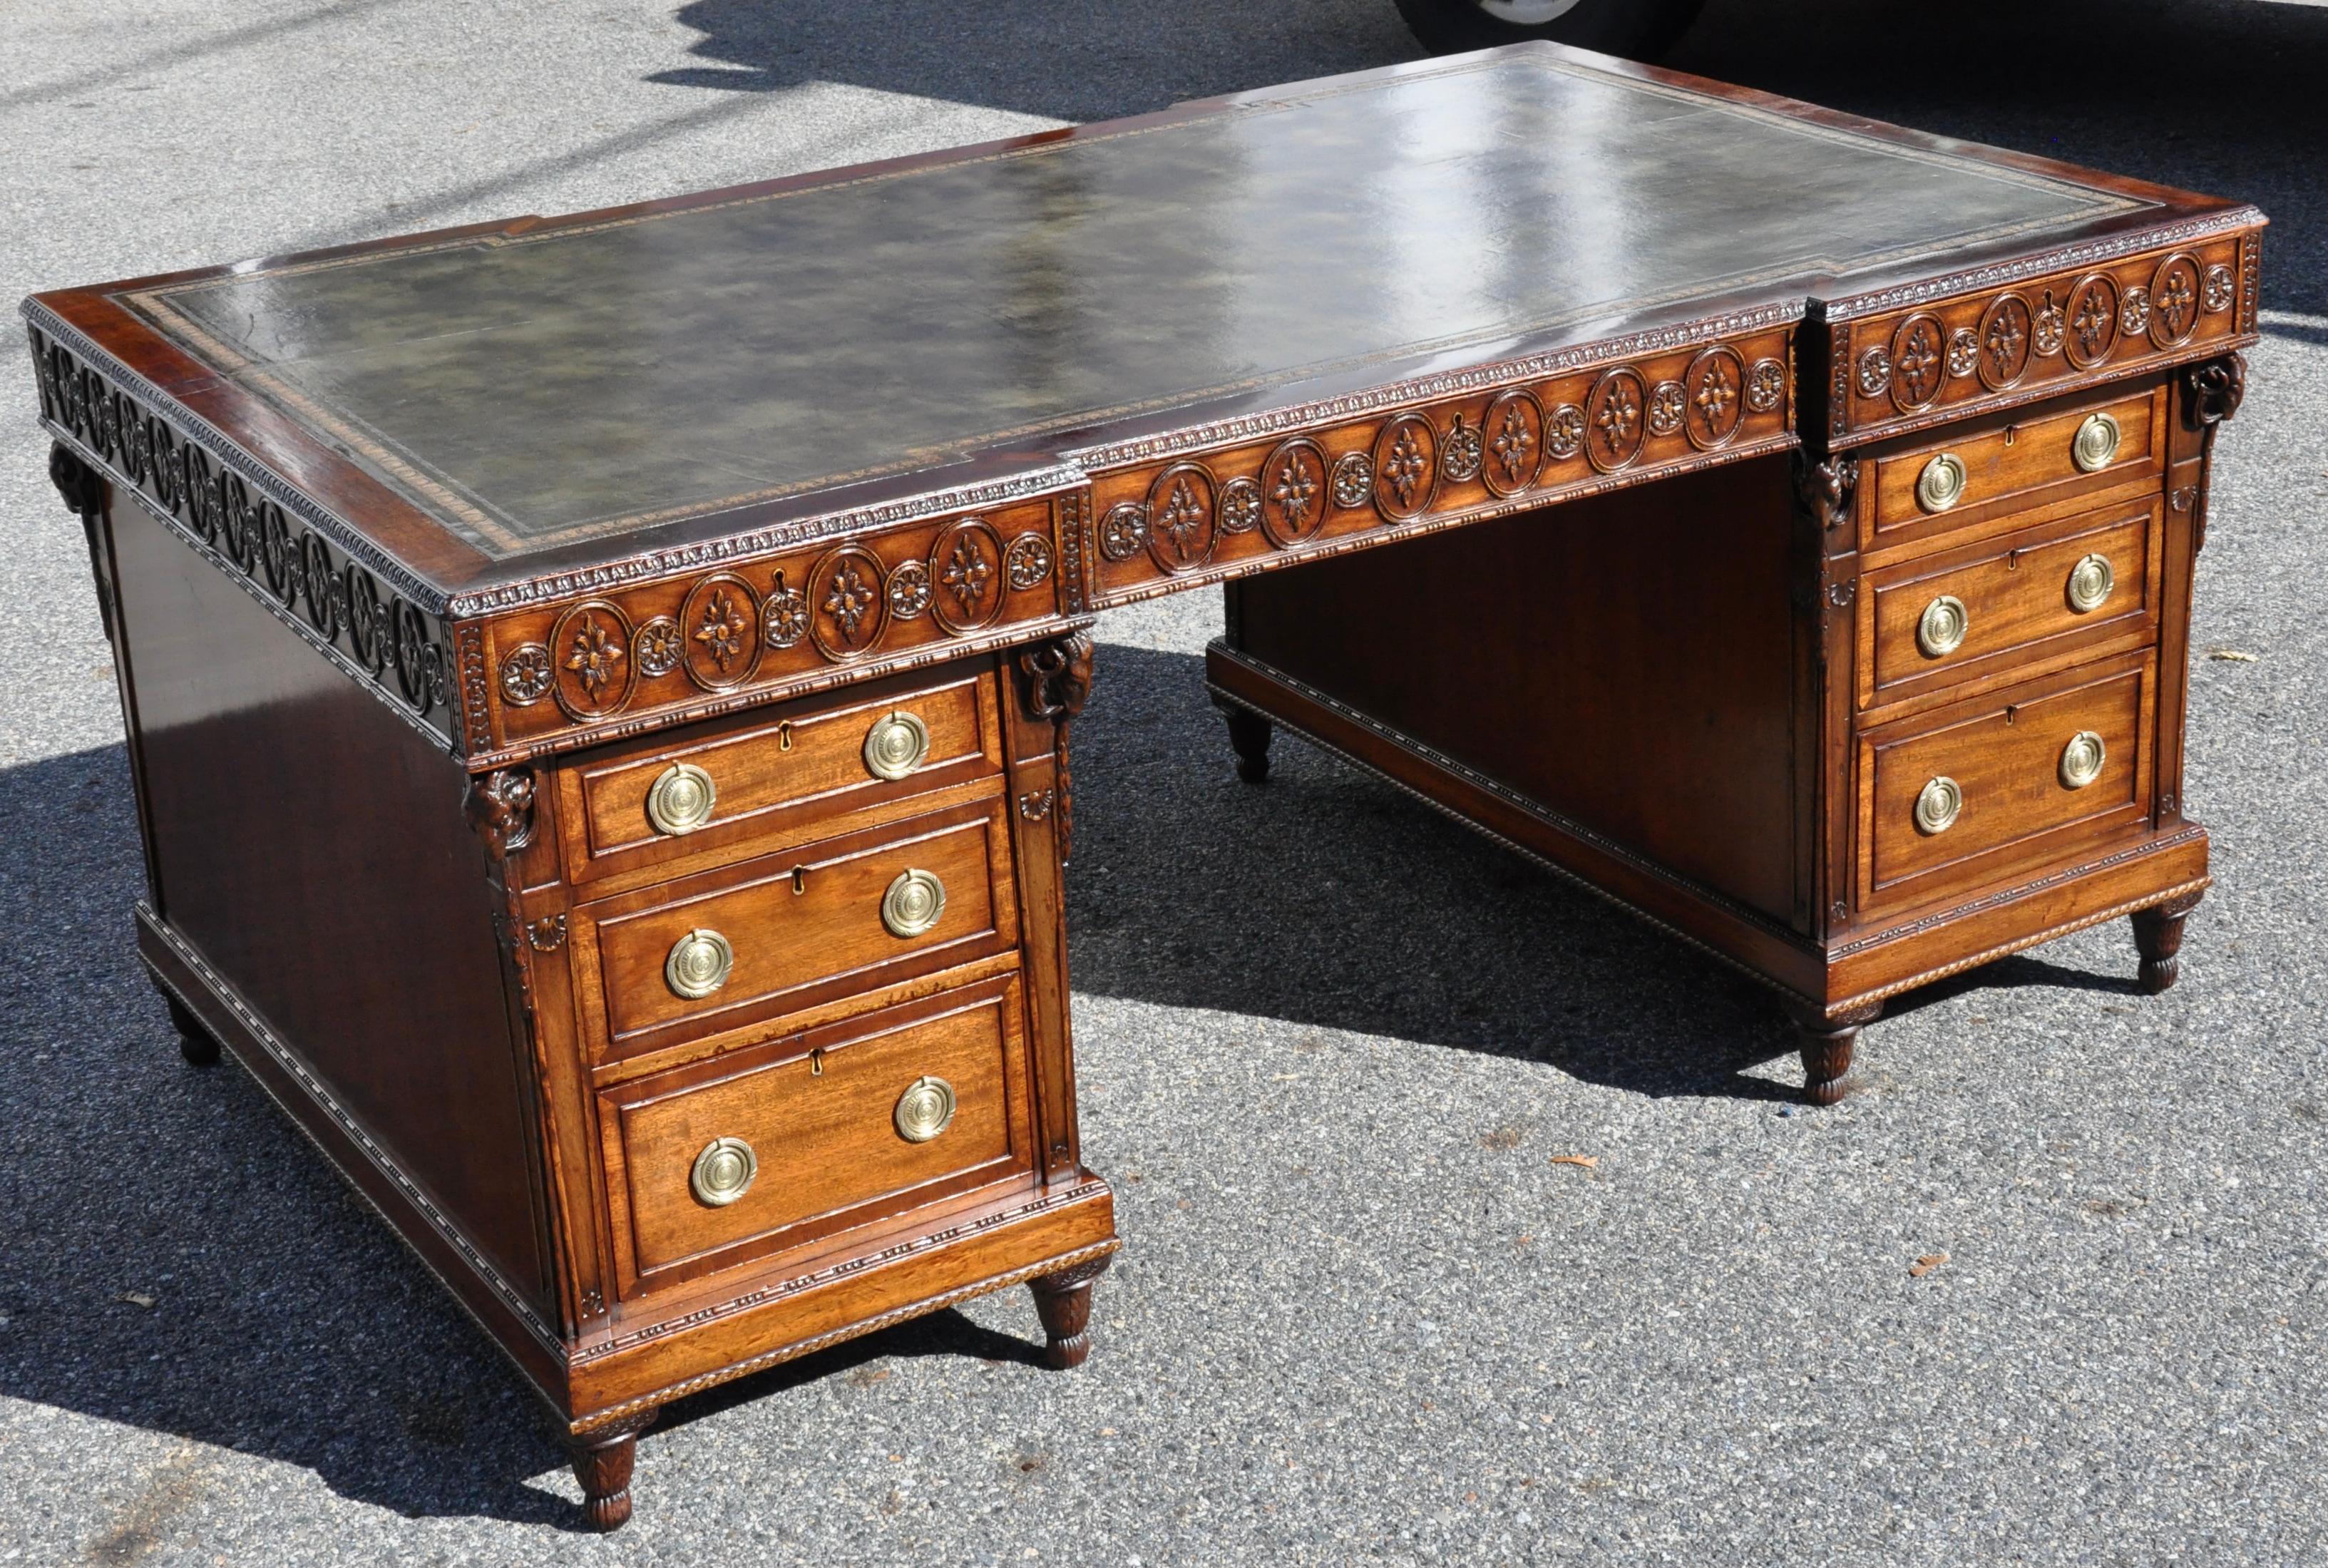 Fine 19th century Mahogany Chippendale style partners desk. Carved throughout. Adams inspired from The Directory. Green tooled leather top. Drop with Frieze drawers on both sides and base cabinets with drawers on one side and functional cabinet door